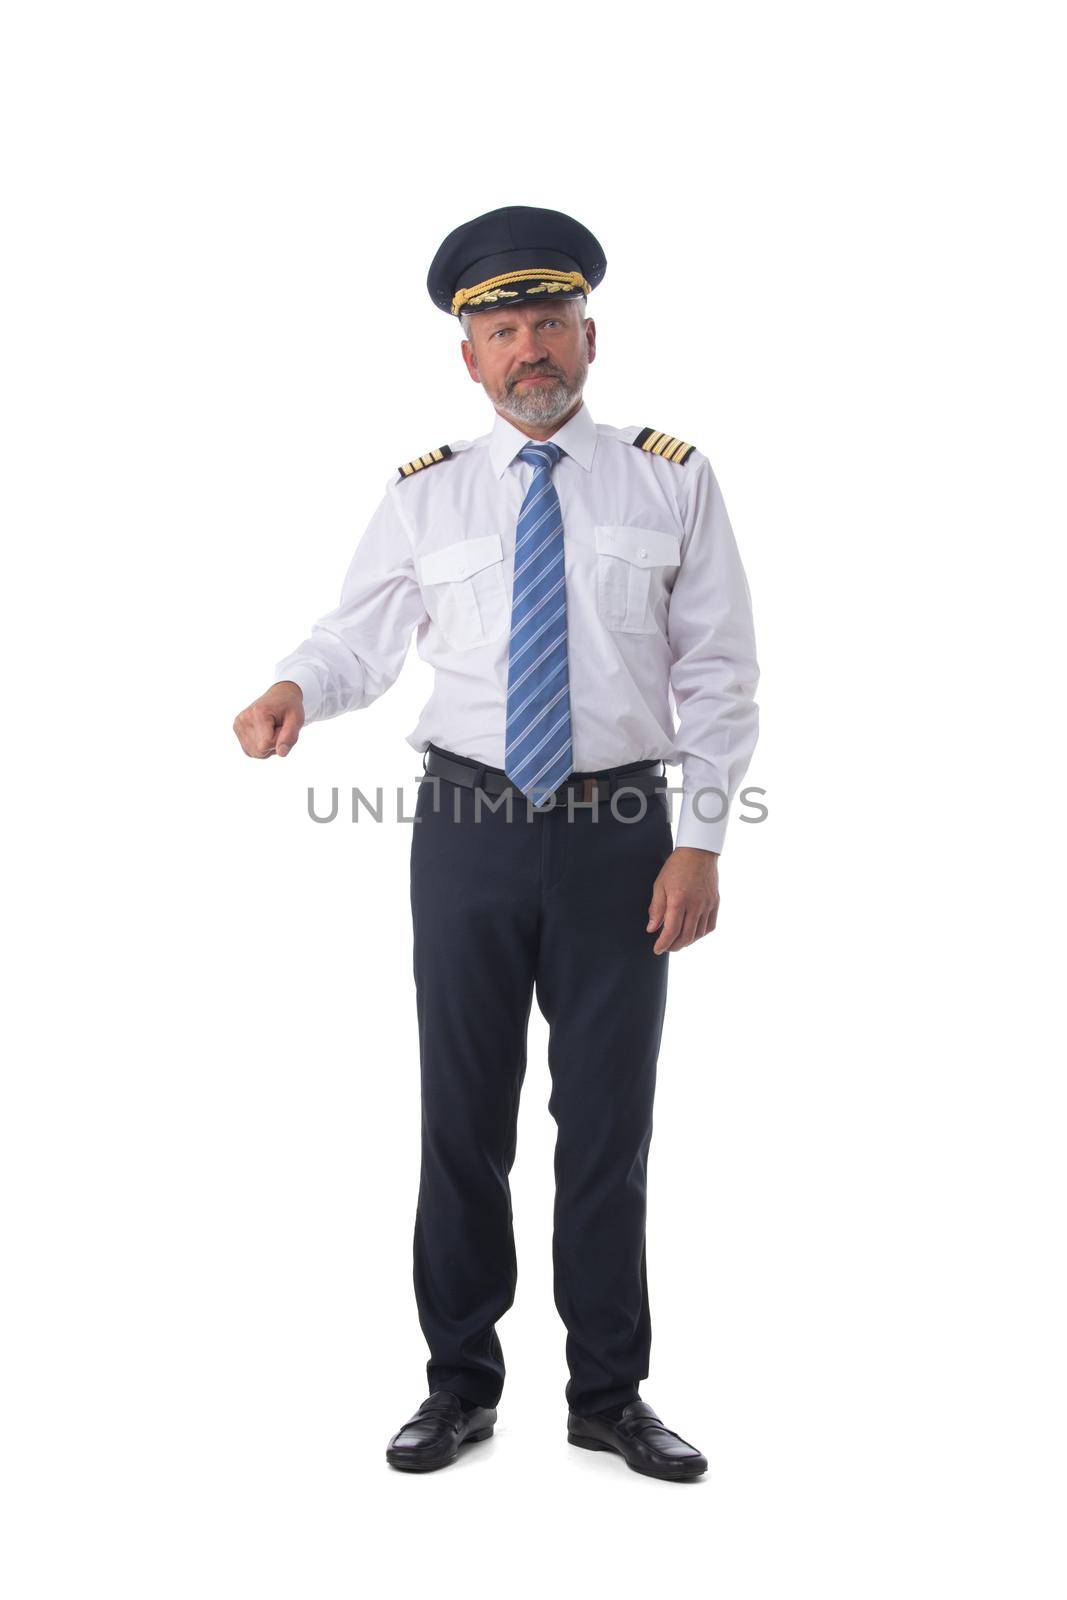 Pilot holding something by ALotOfPeople